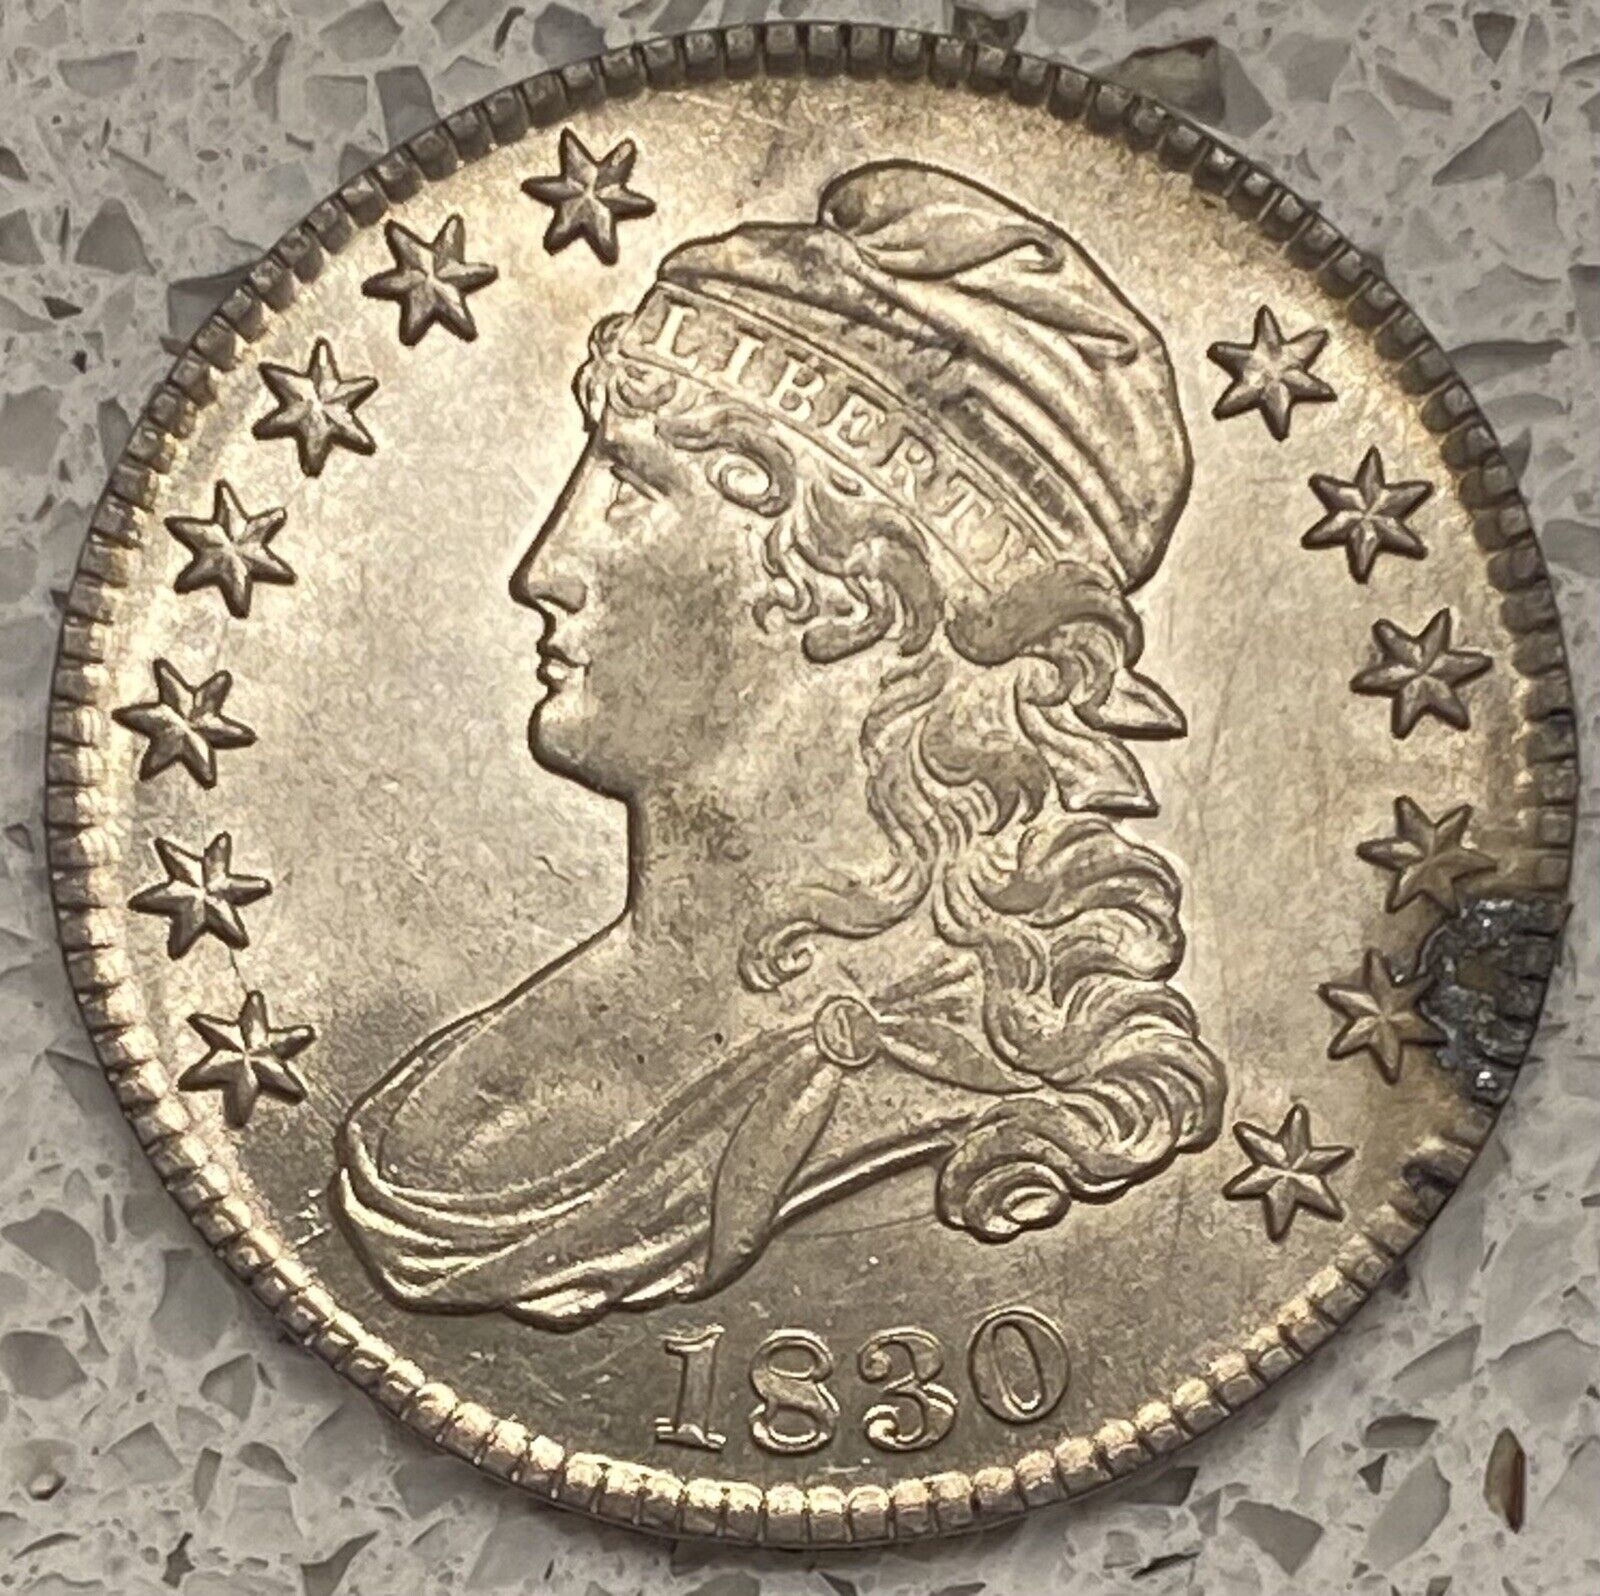 1830 Capped Bust Half Dollar. Uncirculated.